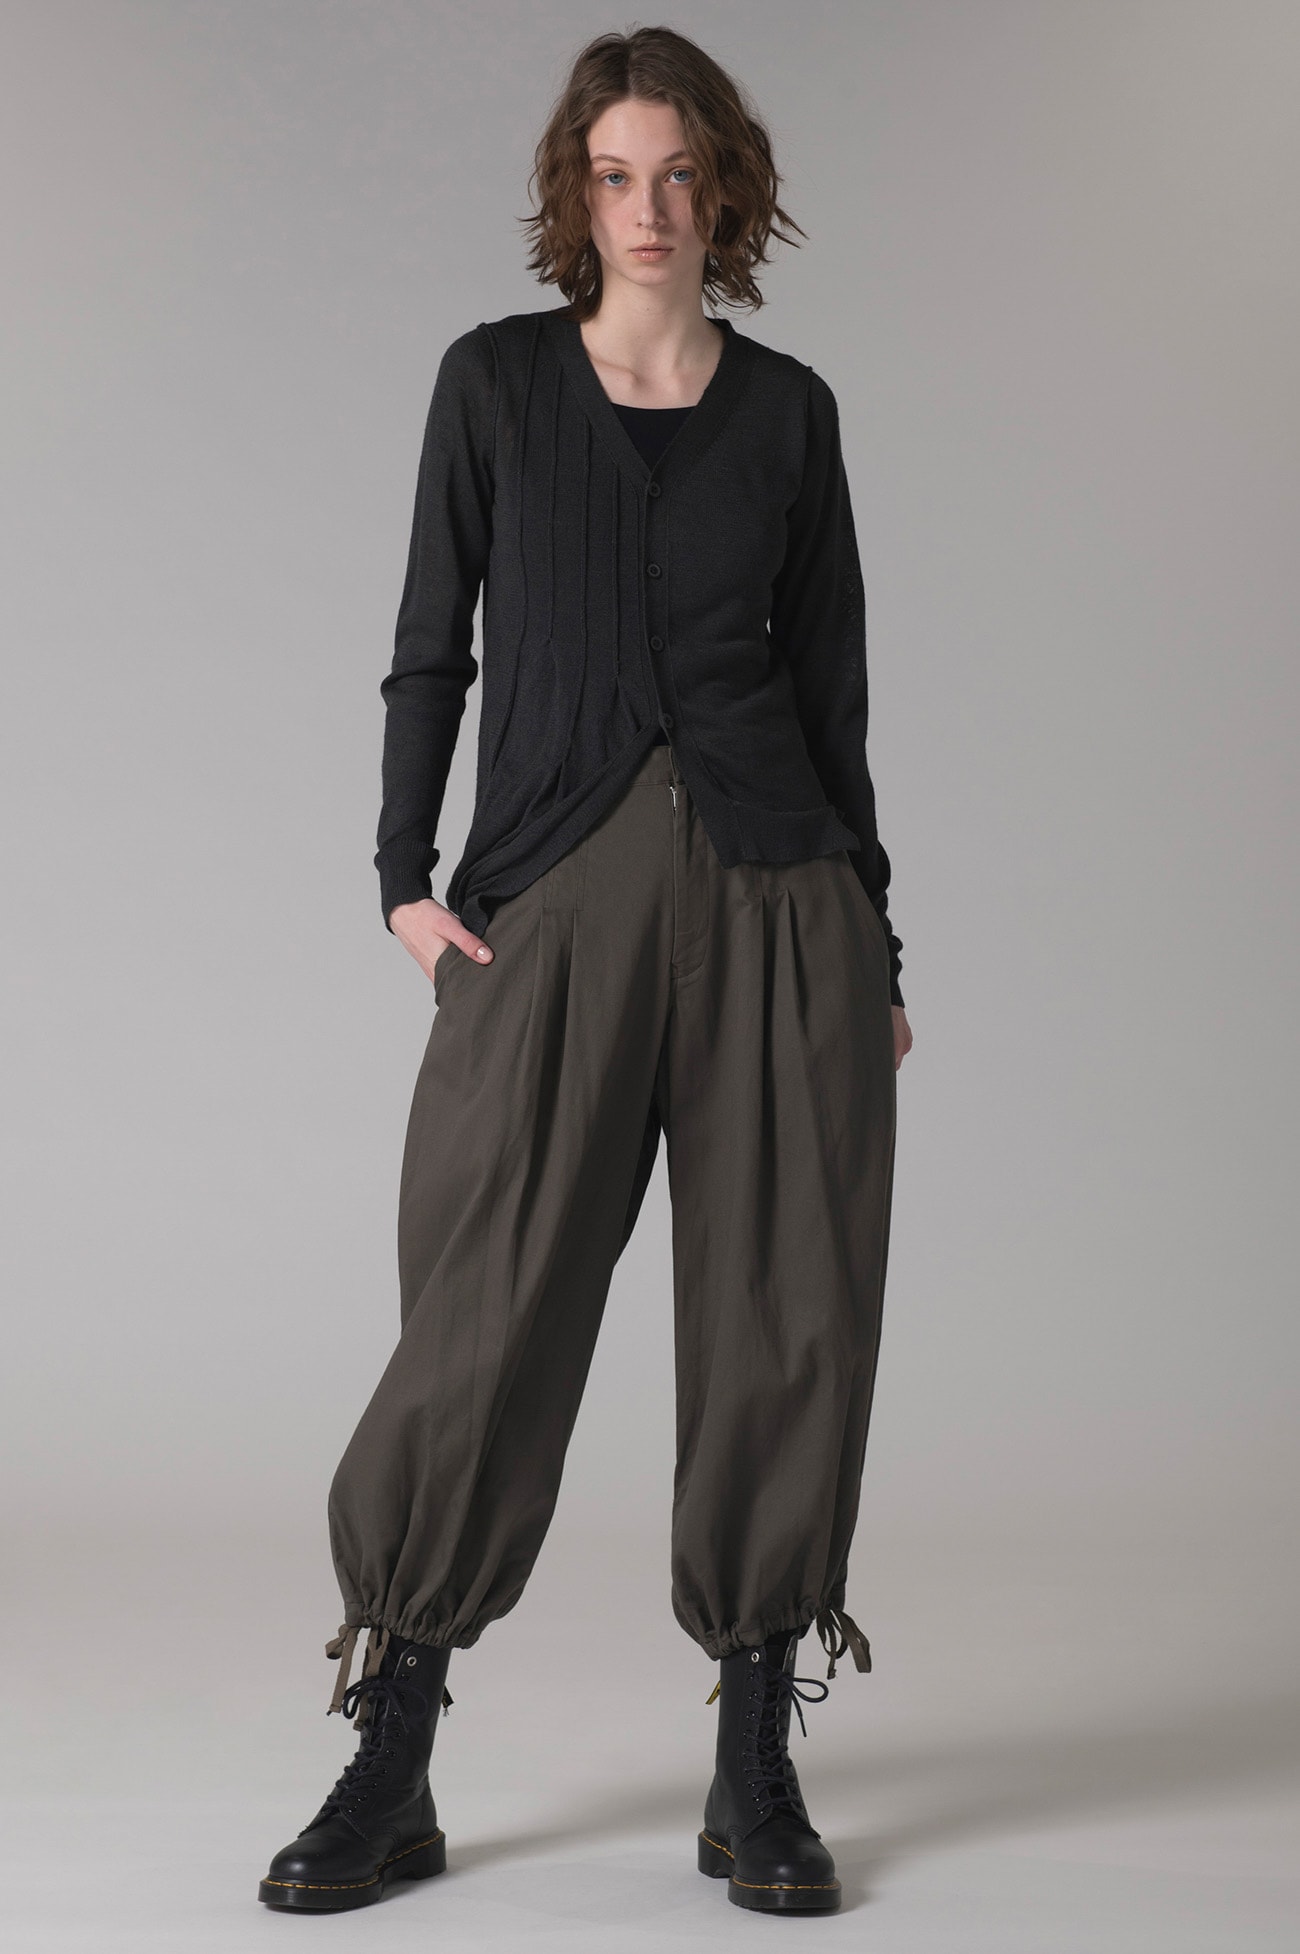 [Y's BORN PRODUT] COTTON TWILL PLEATED PANTS WITH GATHERED HEMS